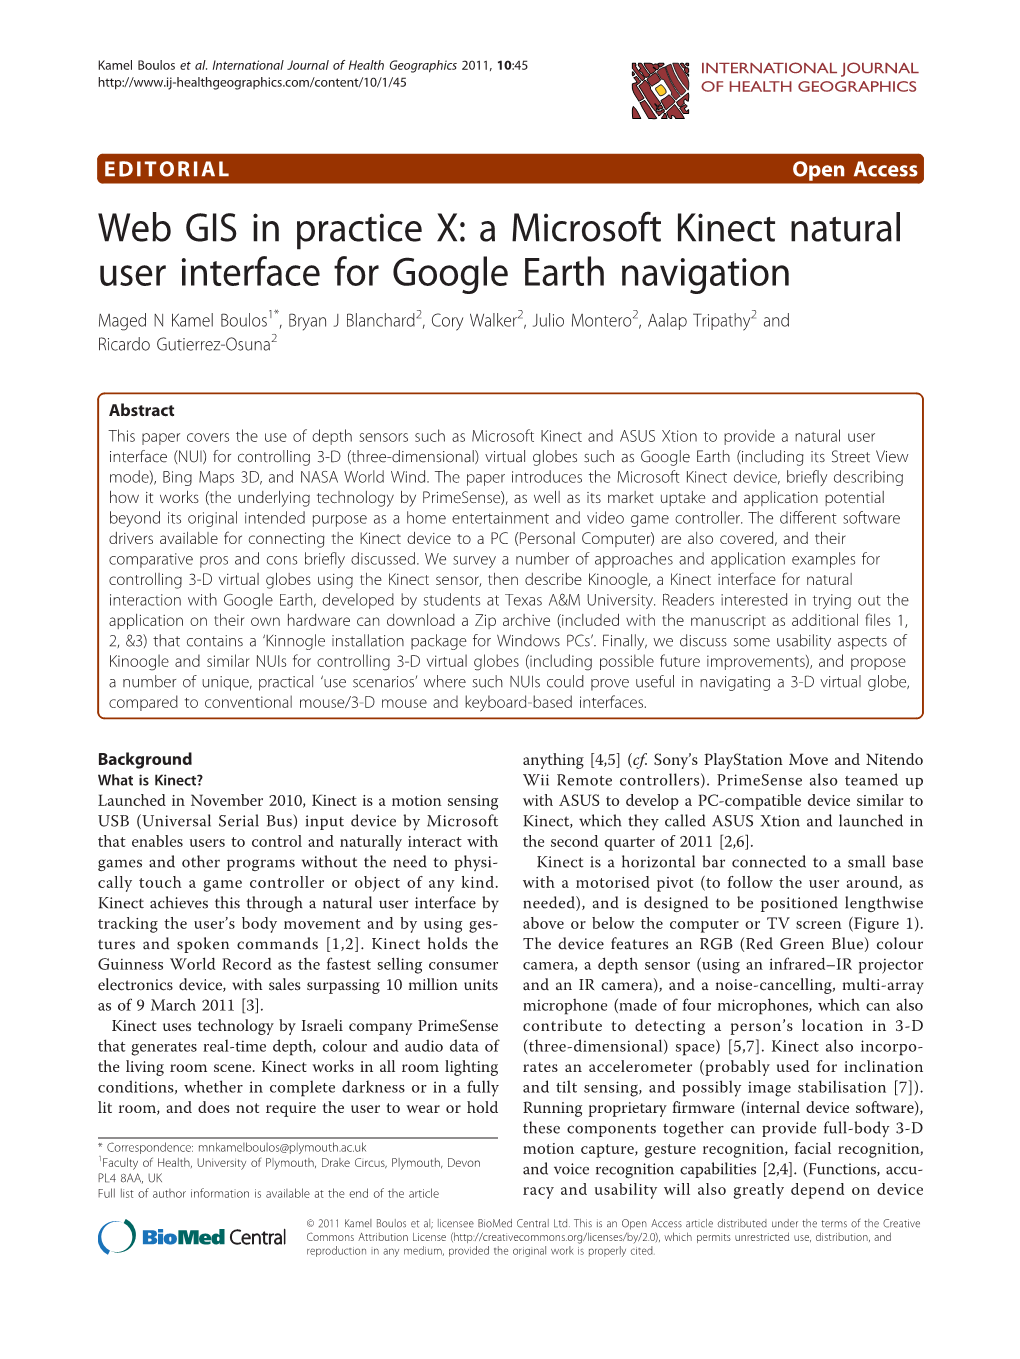 Web GIS in Practice X: a Microsoft Kinect Natural User Interface for Google Earth Navigation